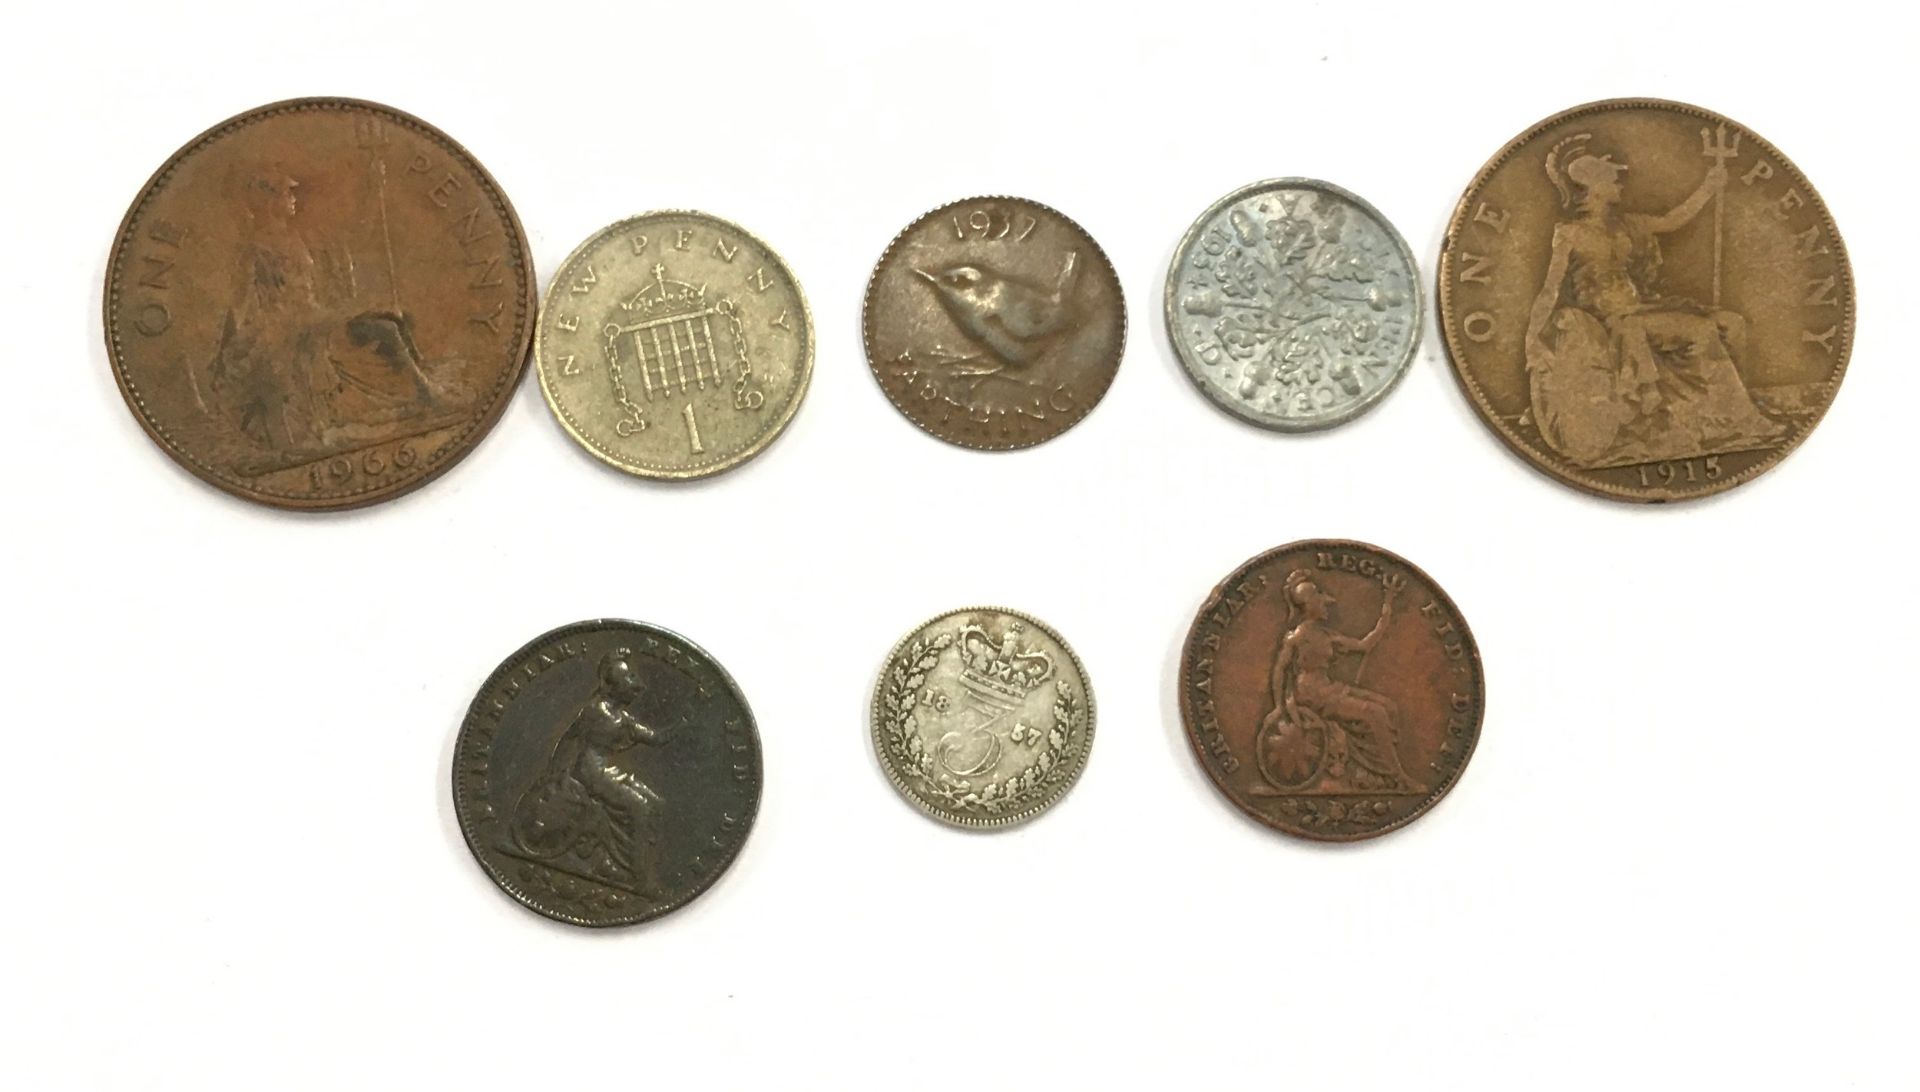 Small collection of 3 English overstamped date coins and 5 other interesting coins.